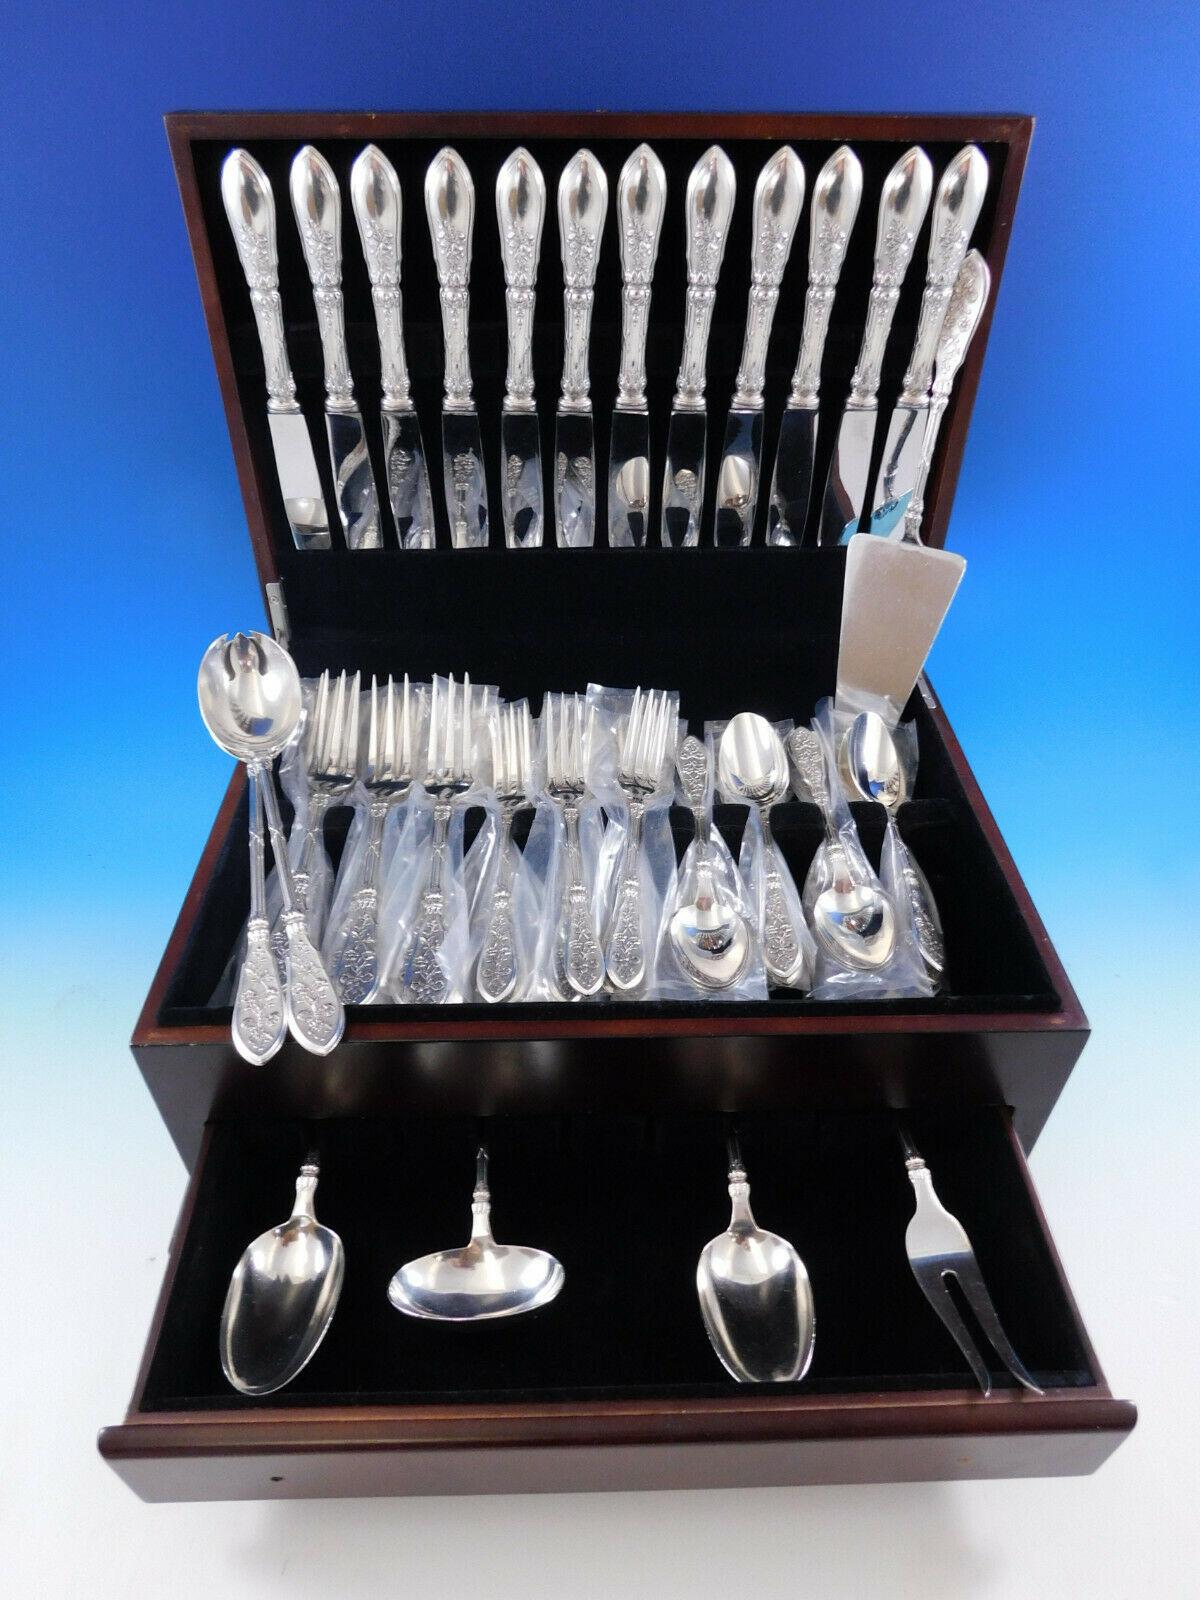 Exceptional dinner size French silver set in a design of flowing ribbon, bows, and flowers. Grand Cru by Henin & Cie sterling silver flatware set - 55 pieces. This set includes: 

12 dinner size knives, 10 1/8